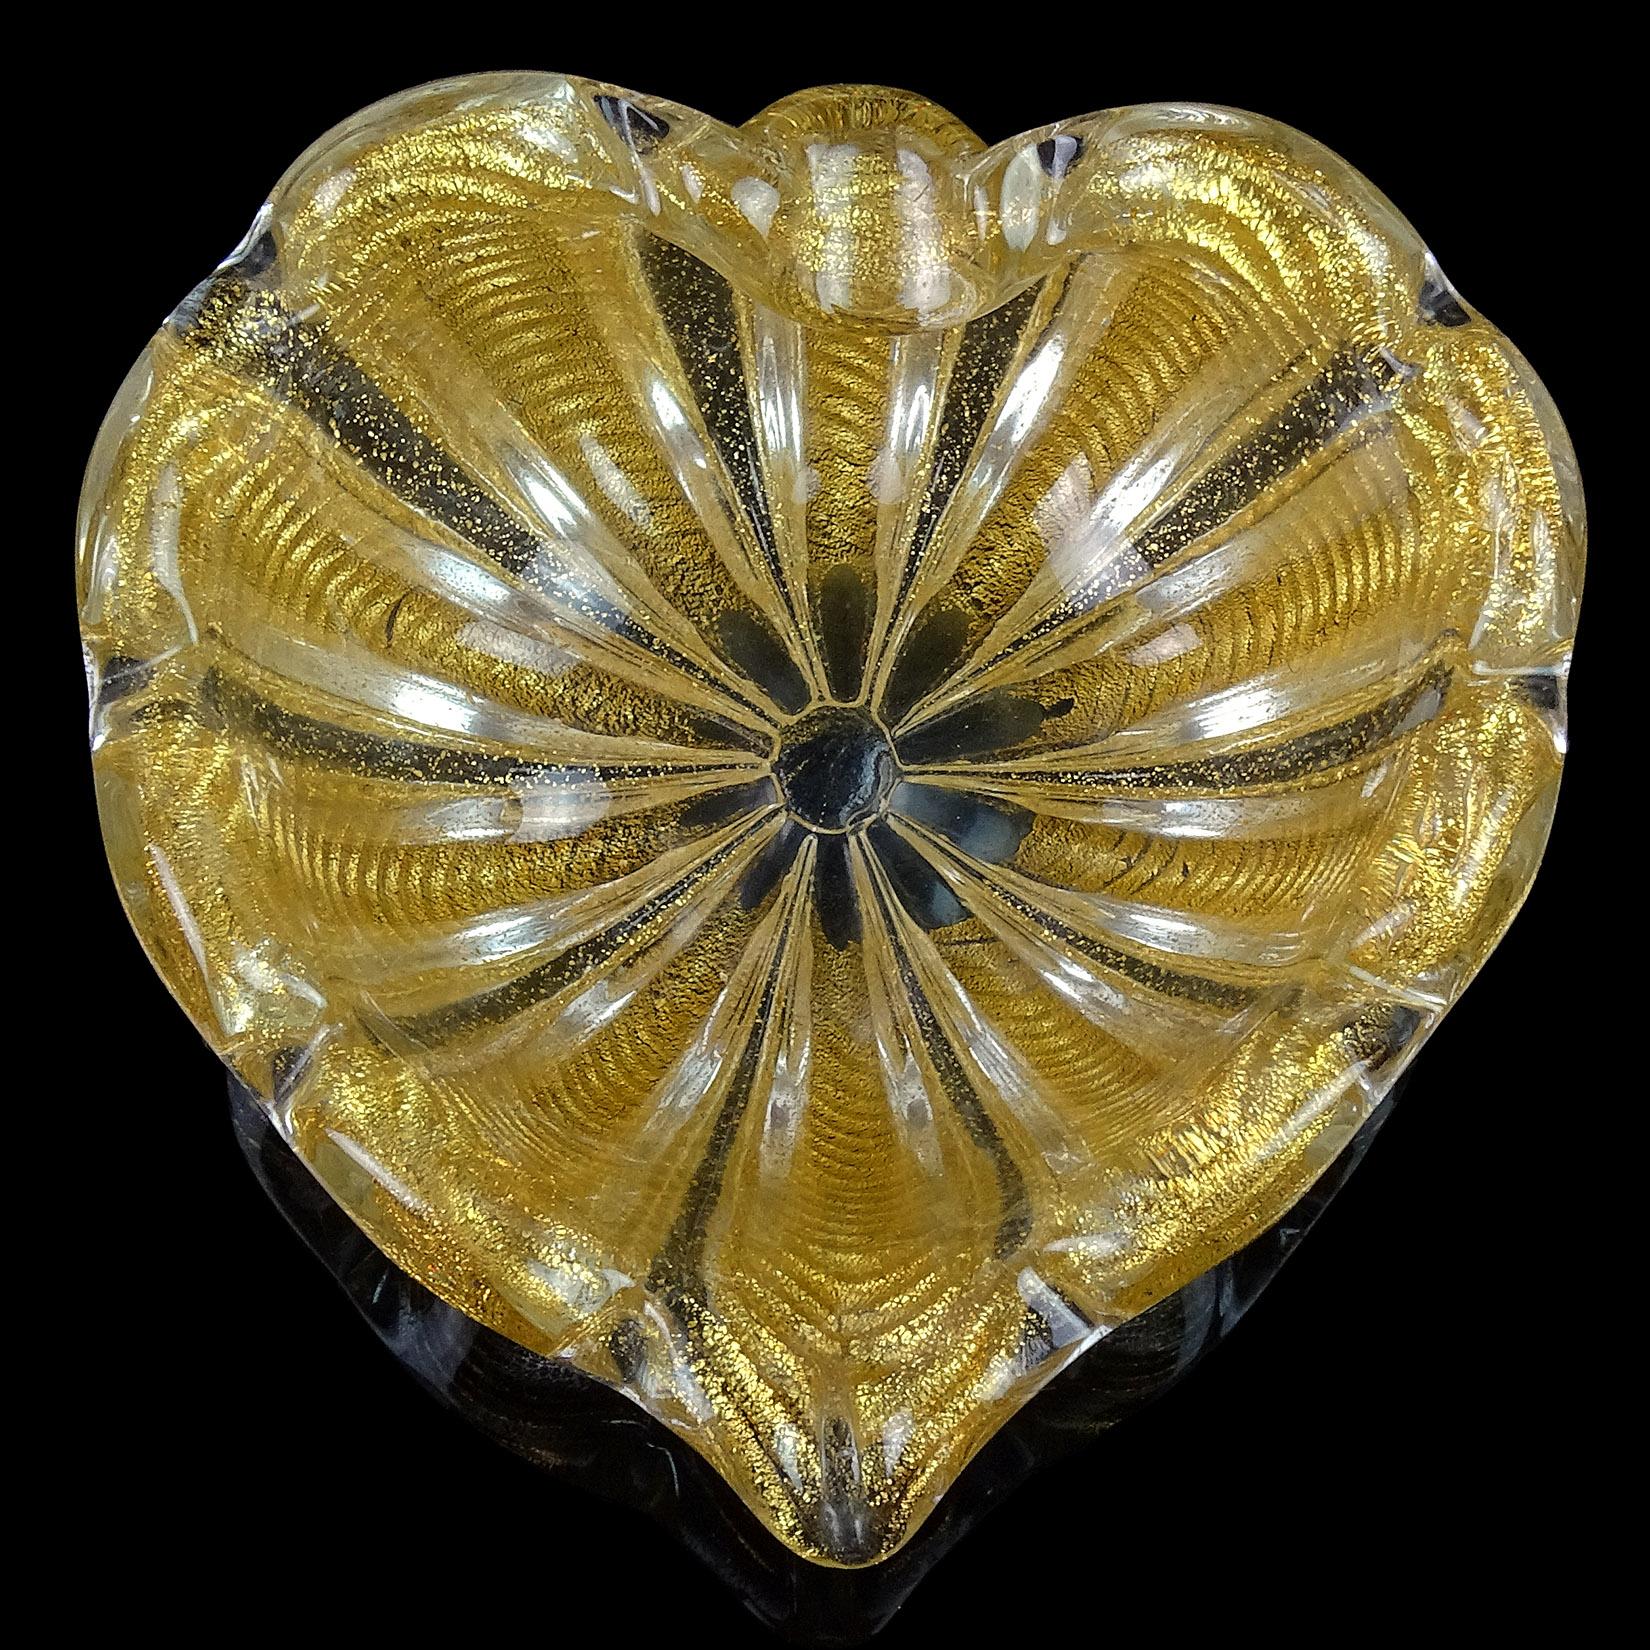 Beautiful vintage Murano hand blown gold flecks Italian art glass heart shaped bowl. Documented to designer Ercole Barovier for the Barovier e Toso Company. The bowl has a ribbed pattern and is profusely covered in gold leaf. Would make a great